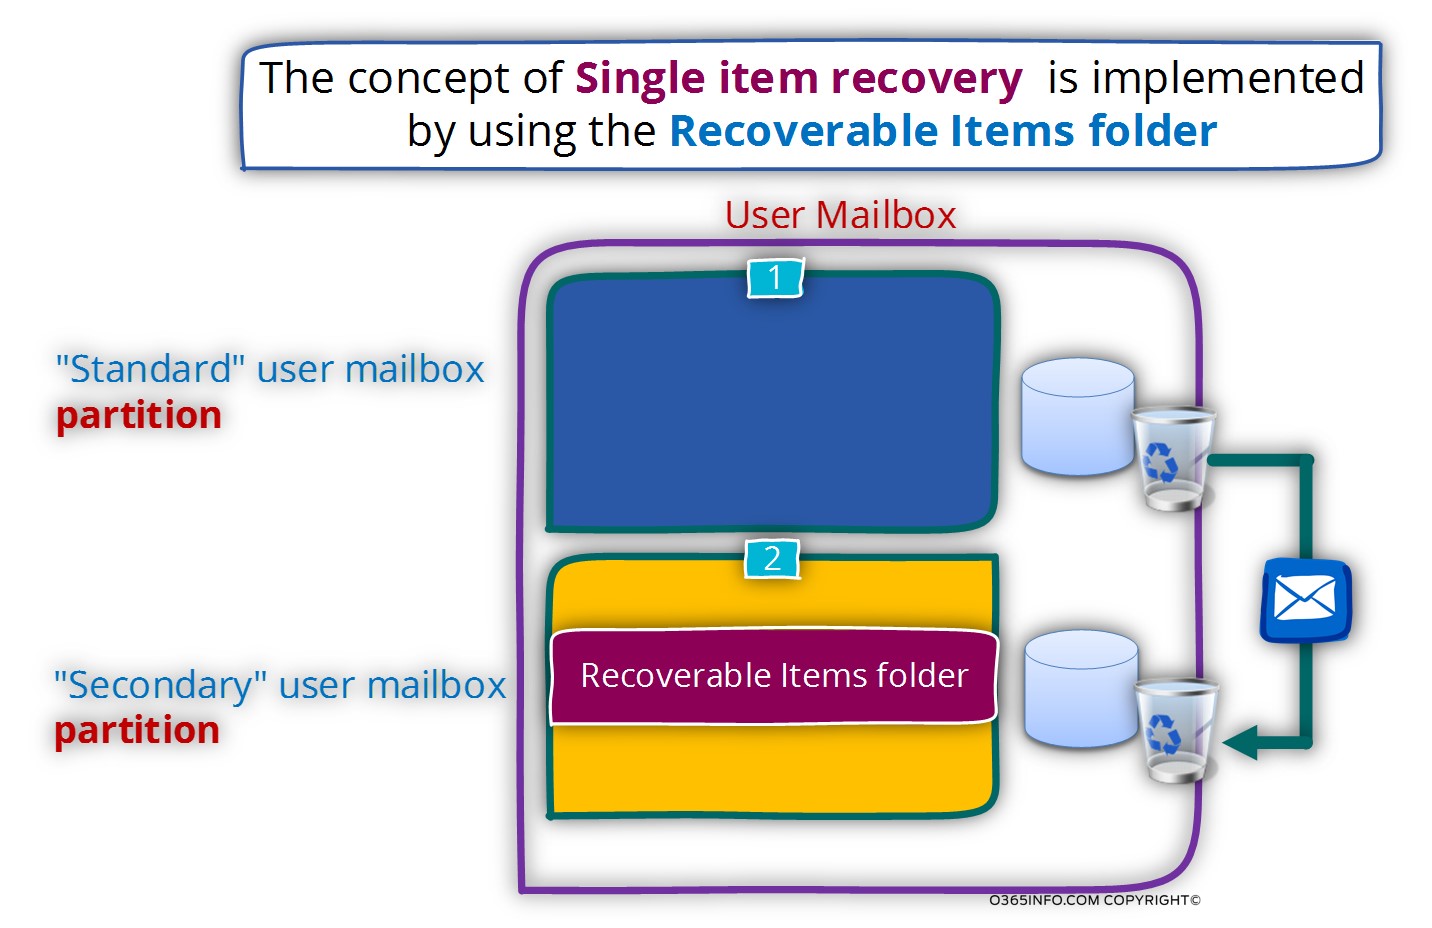 The concept of Recoverable Items folder is implemented by using the Recoverable Items folder